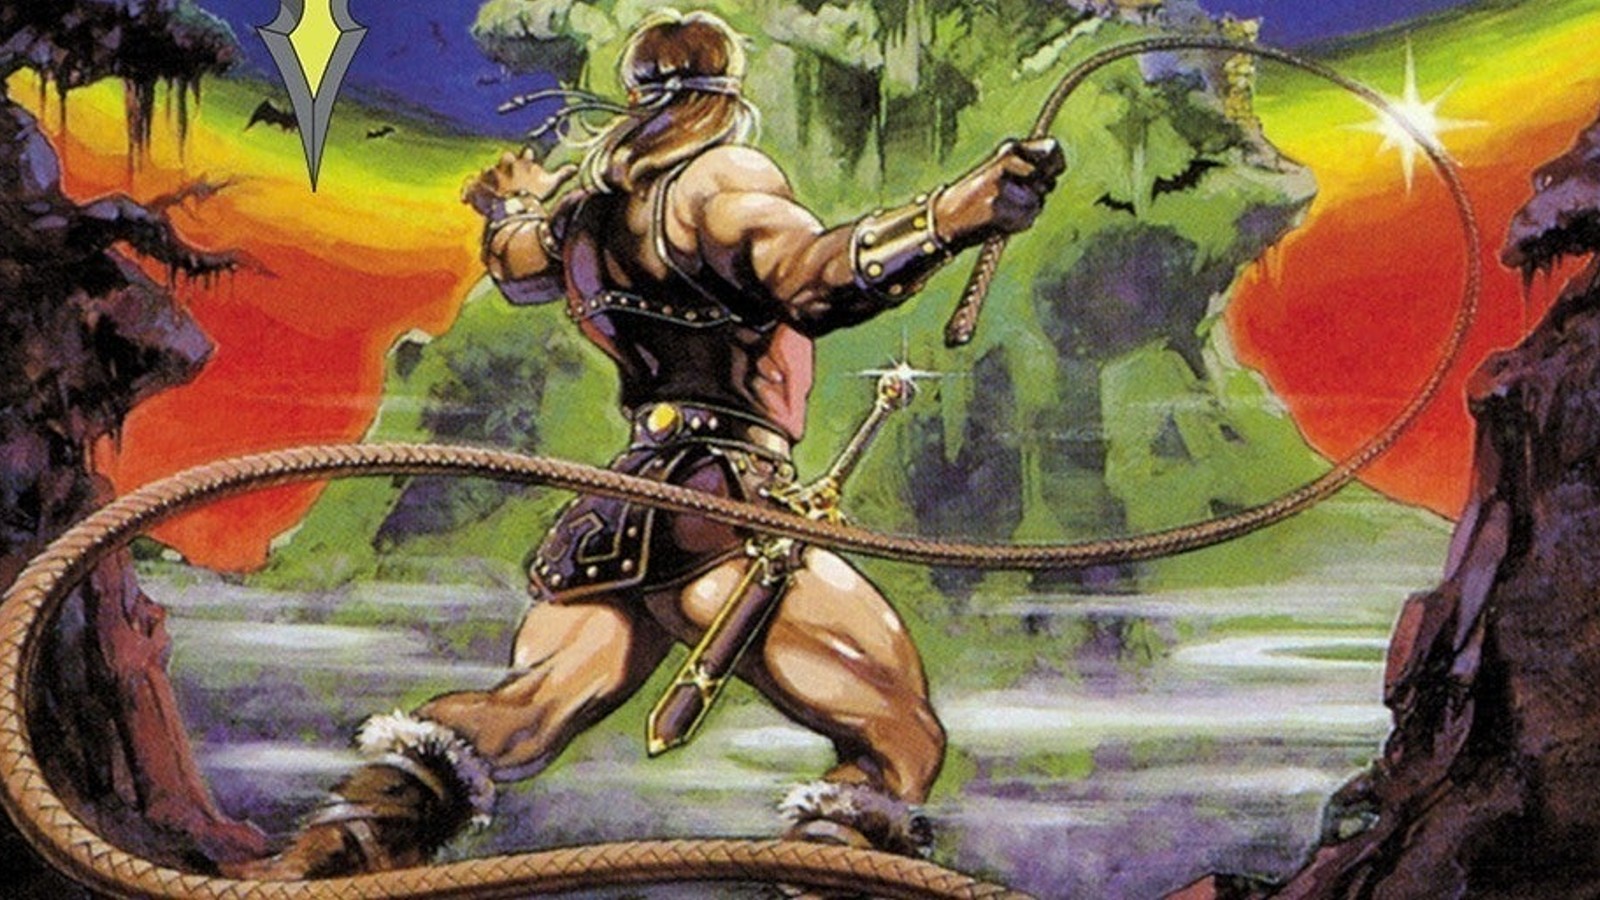 To celebrate Castlevania’s 35th anniversary Konami is auctioning NFTs